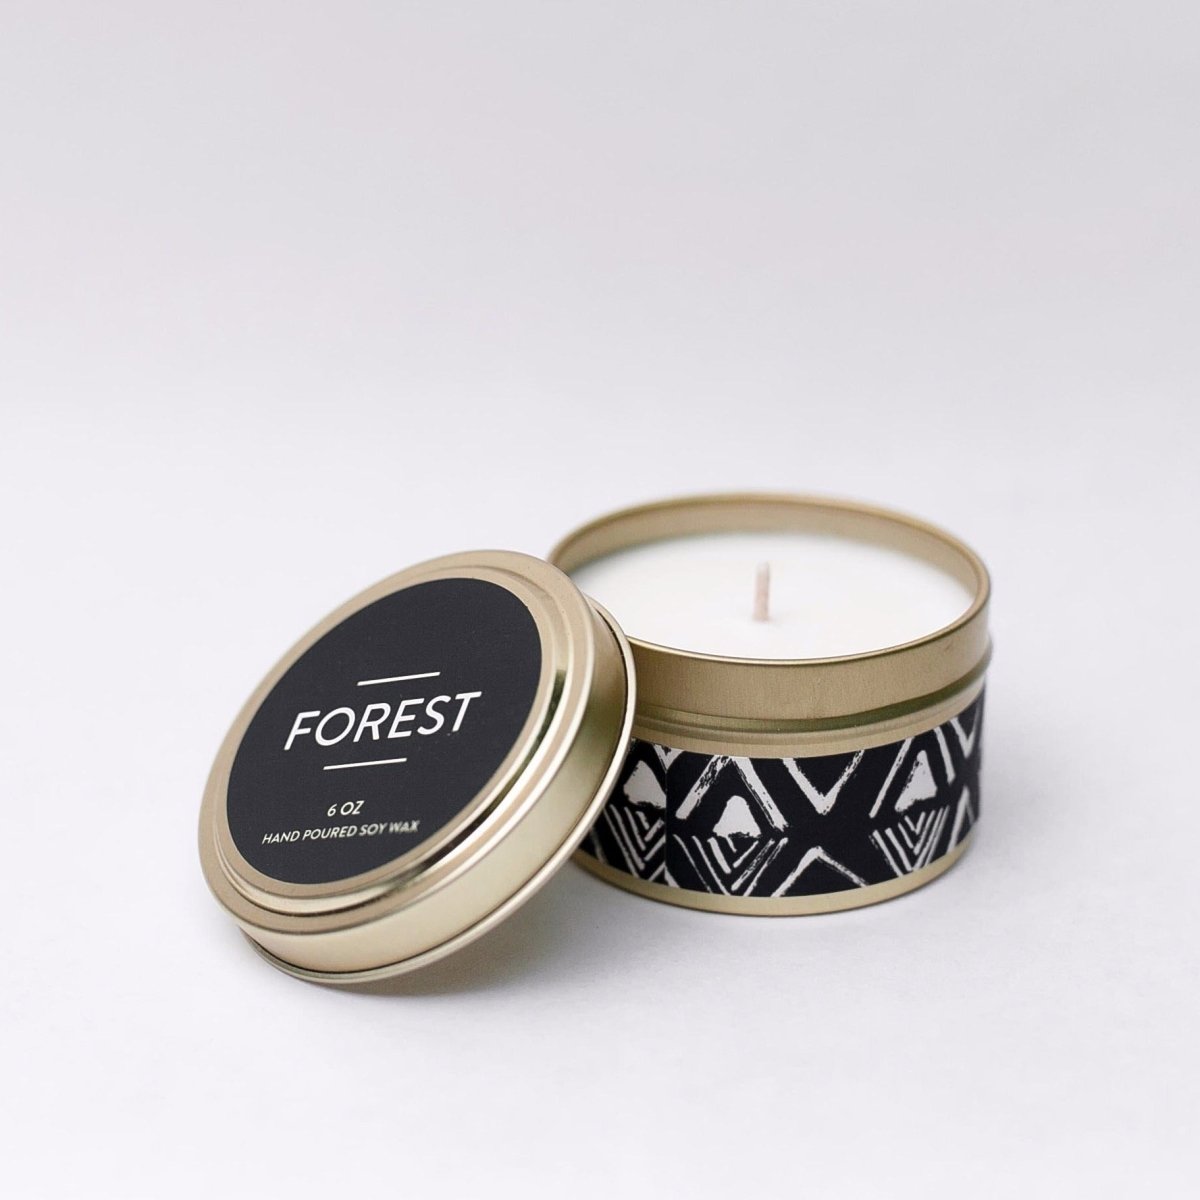 6oz Forest Candle in metal tin. Hand-poured in Seattle, Washington.